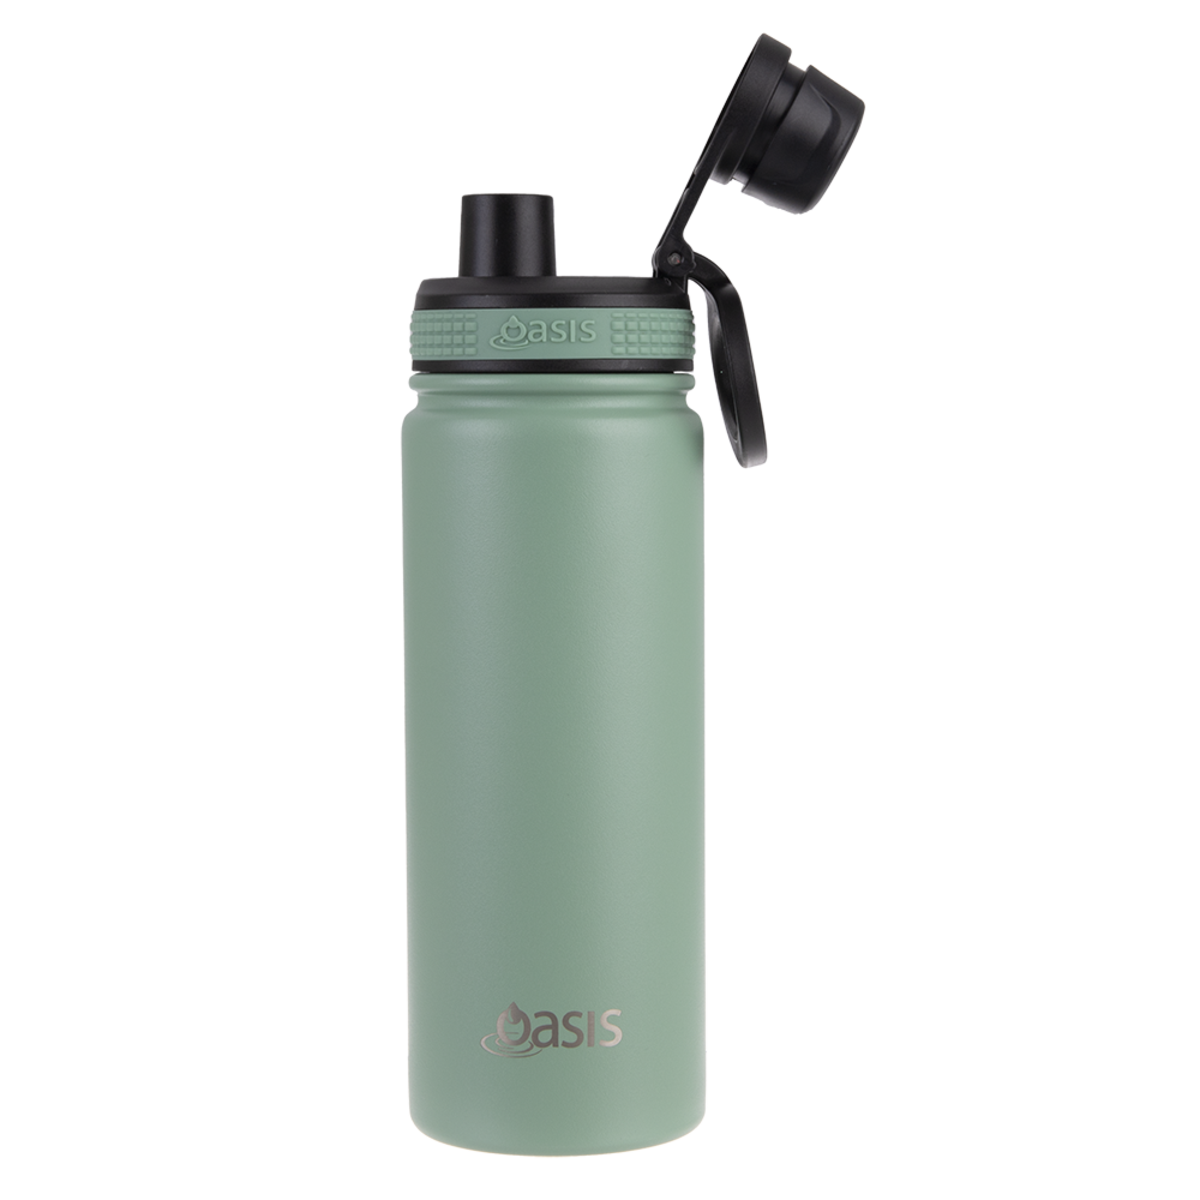 OASIS STAINLESS STEEL DOUBLE WALL INSULATED "CHALLENGER" SPORTS BOTTLE W/ SCREW CAP 550ML - Sage Green